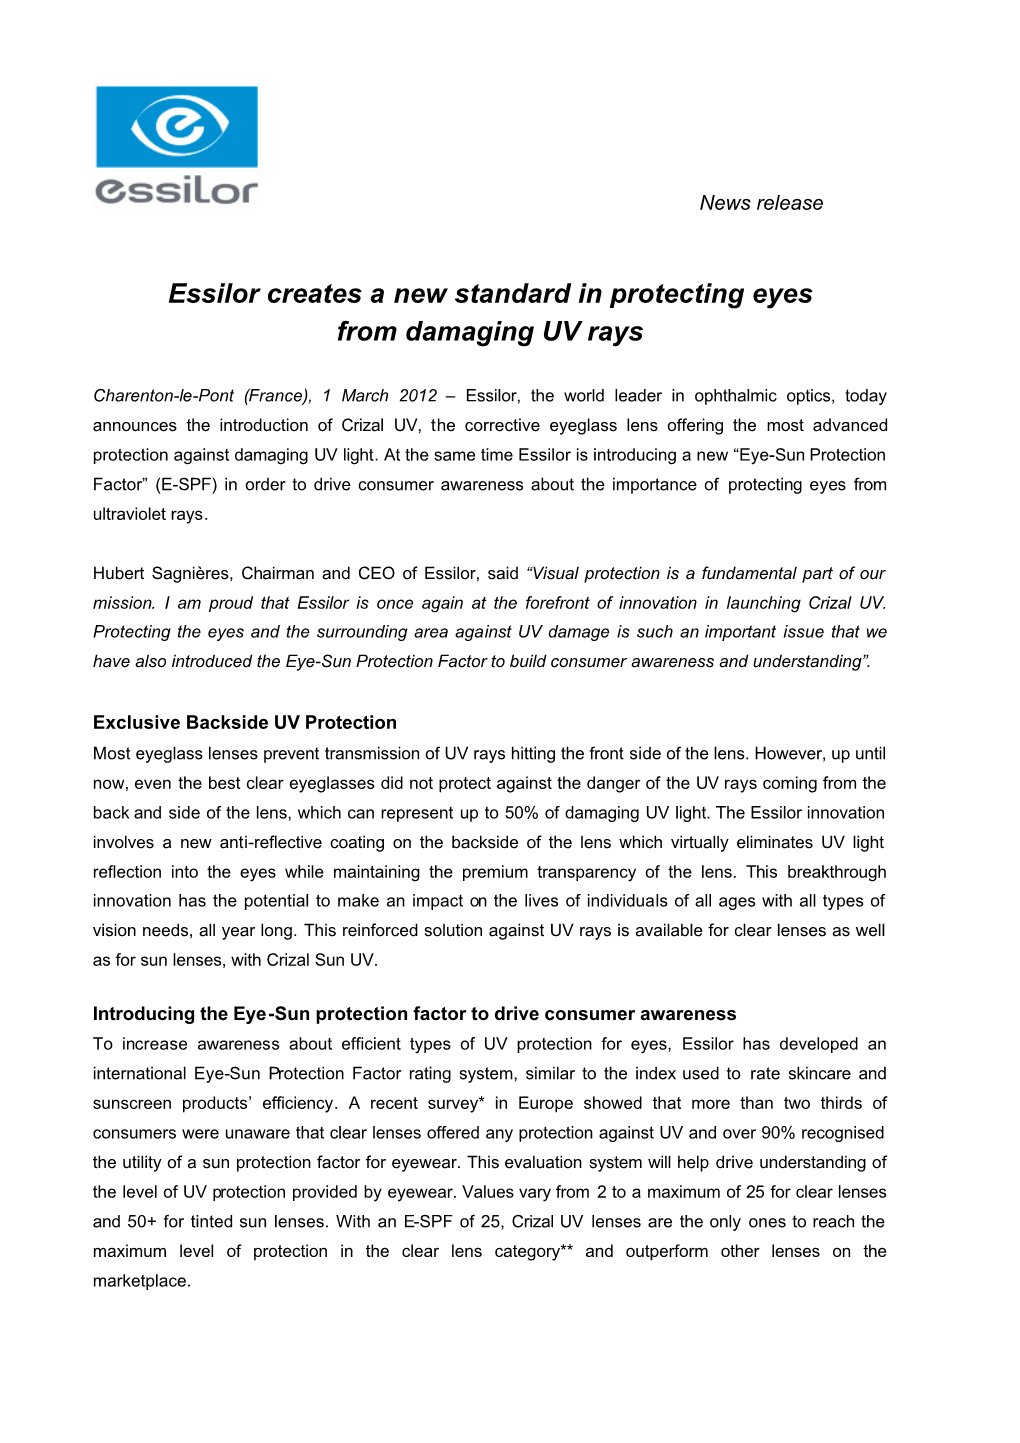 Essilor Creates a New Standard in Protecting Eyes from Damaging UV Rays